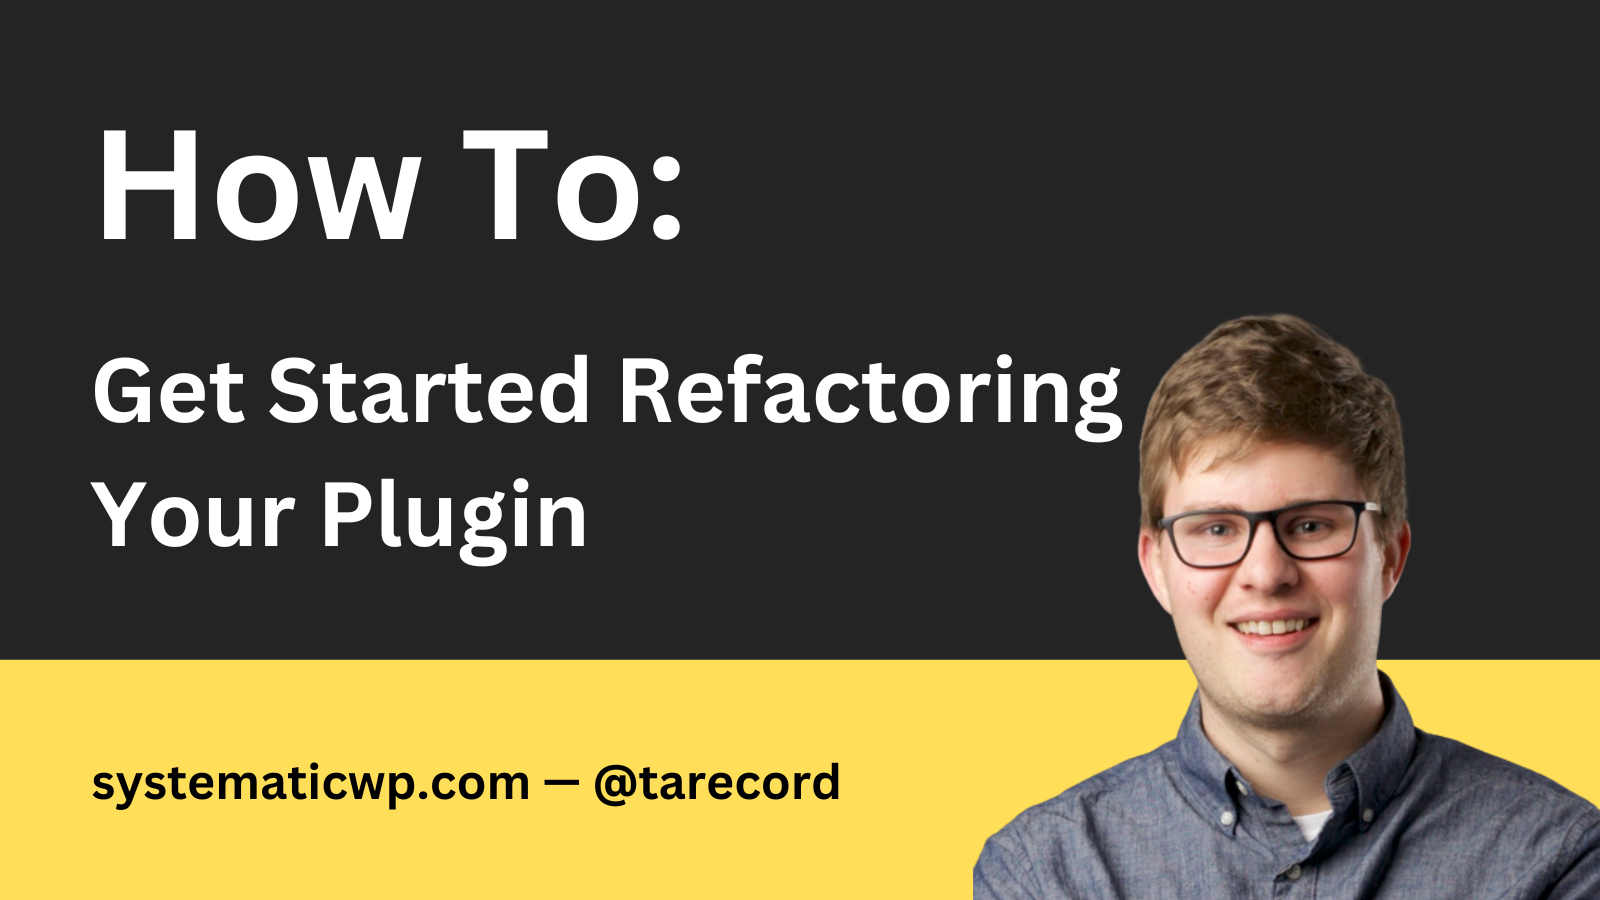 How to: Get Started Refactoring Your Plugin